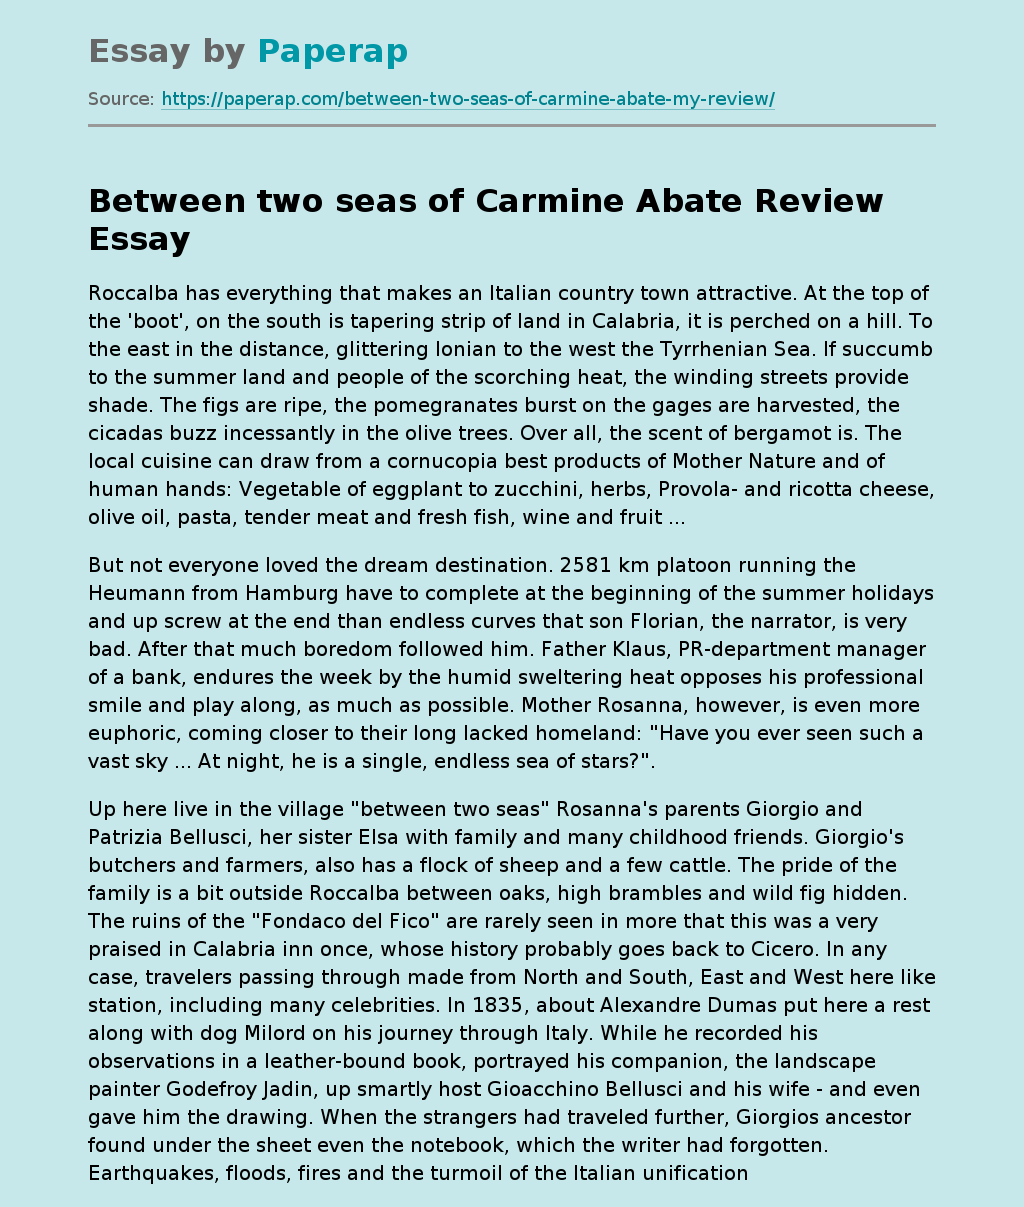 Between two seas of Carmine Abate Review